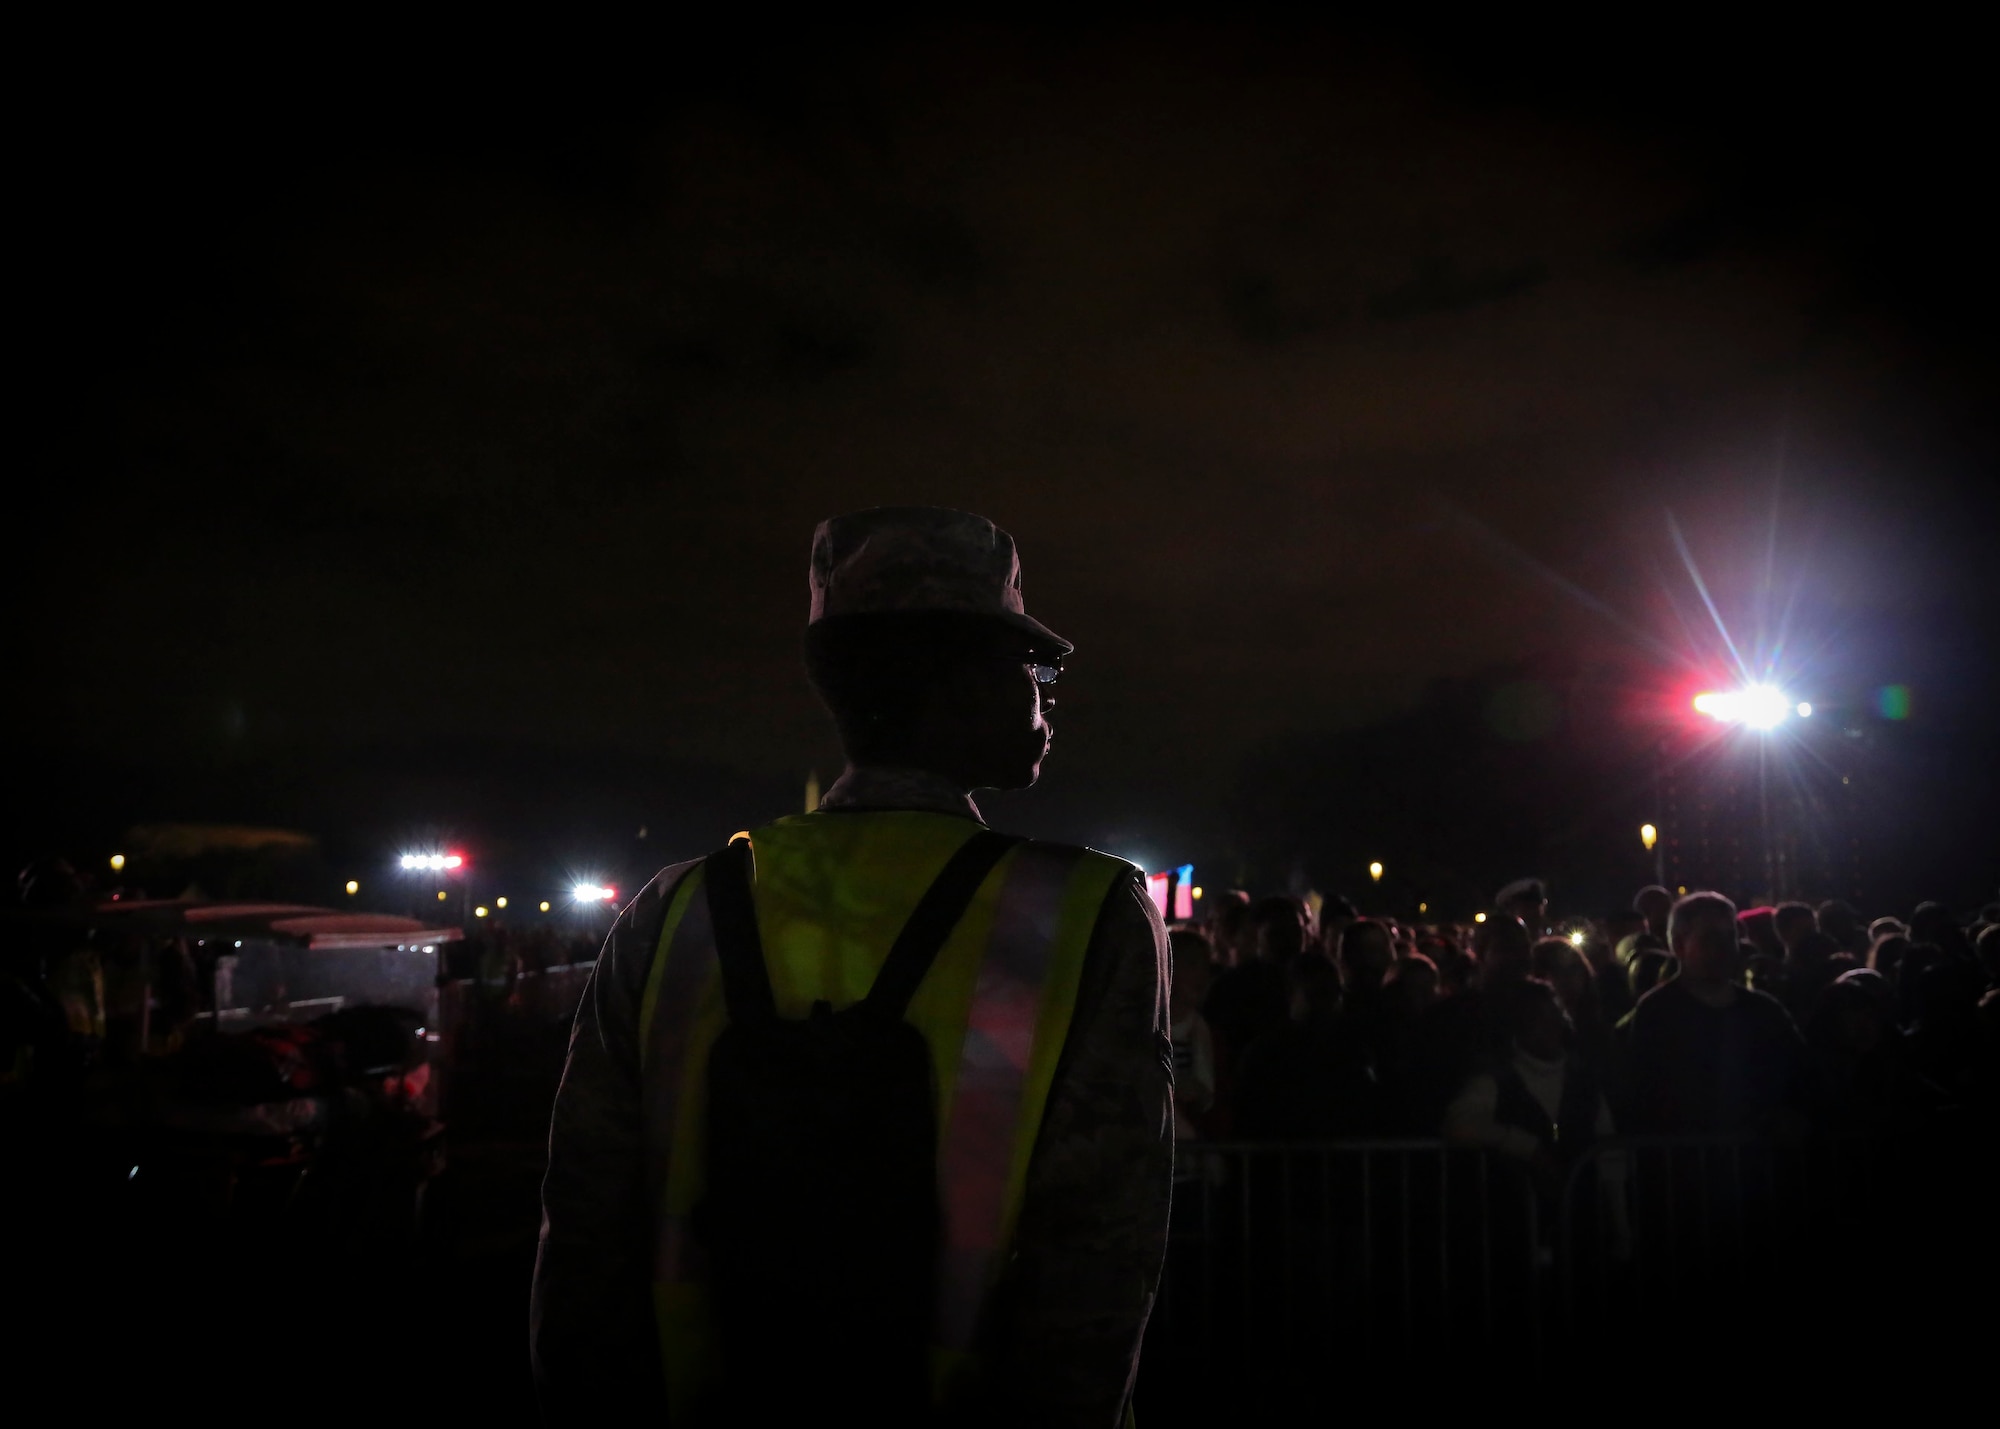 More than 70 Air National Guard members from the 113th Wing volunteered to provide security during "The Concert for Valor" at the National Mall, Tuesday, Nov. 11, 2014. (U.S. Air National Guard photo by 1st Lt. Nathan Wallin)